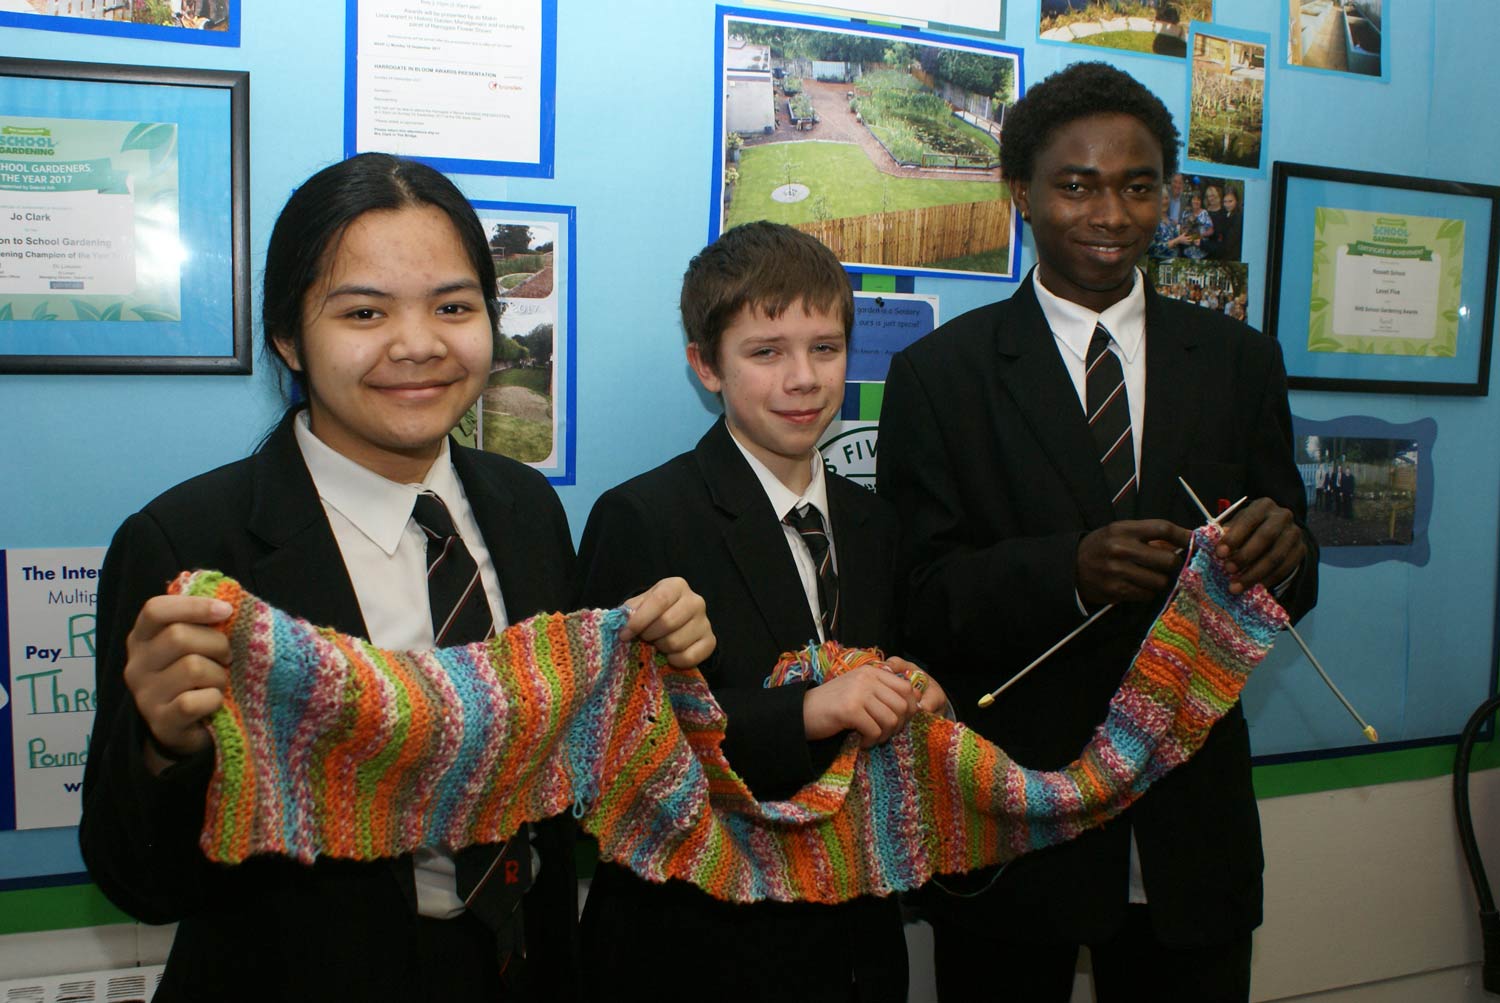 Some of the young knitters at Rossett School with the scarf they have made to donate to a homeless person